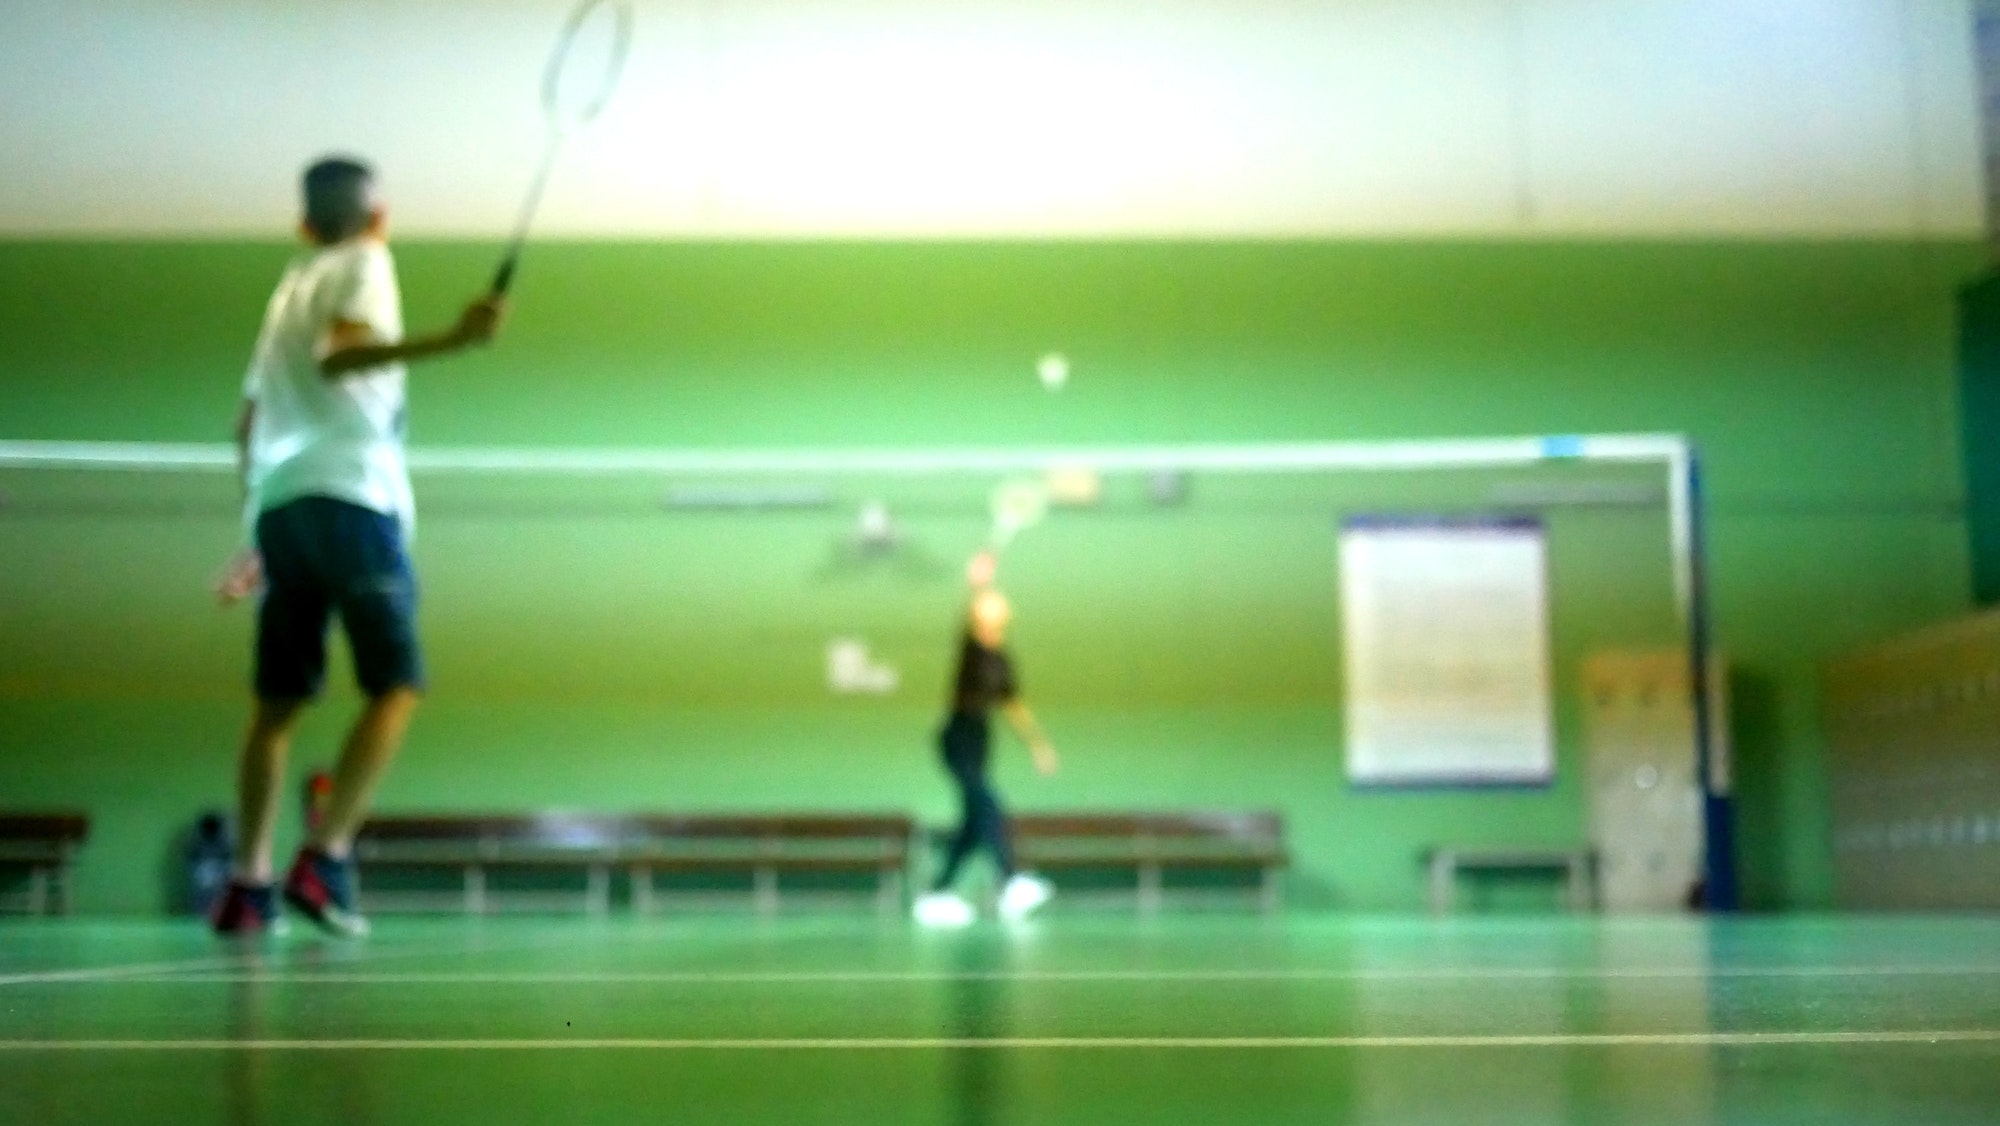 Blurred kid playing badminton in court with friend.